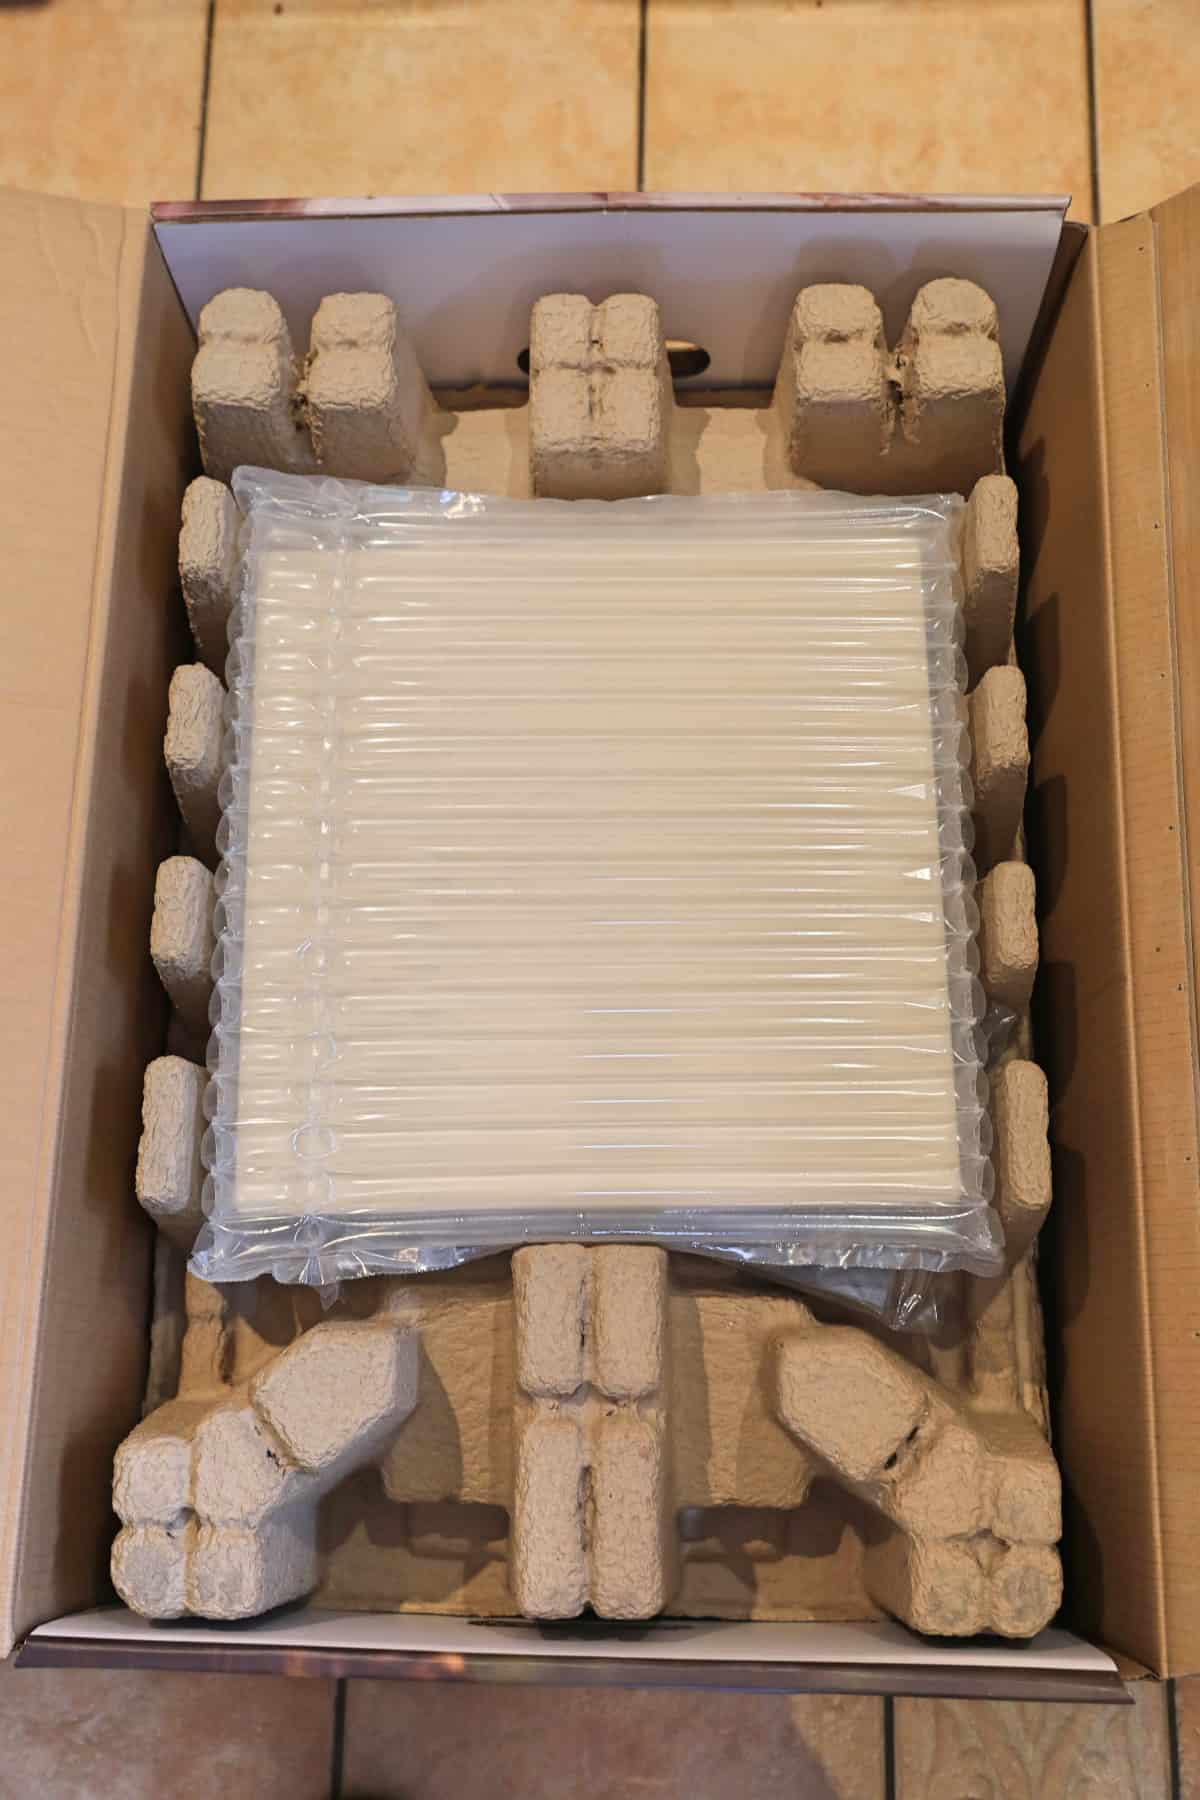 Ooni Karu 12 in box with upper packaging removed to show what's inside.